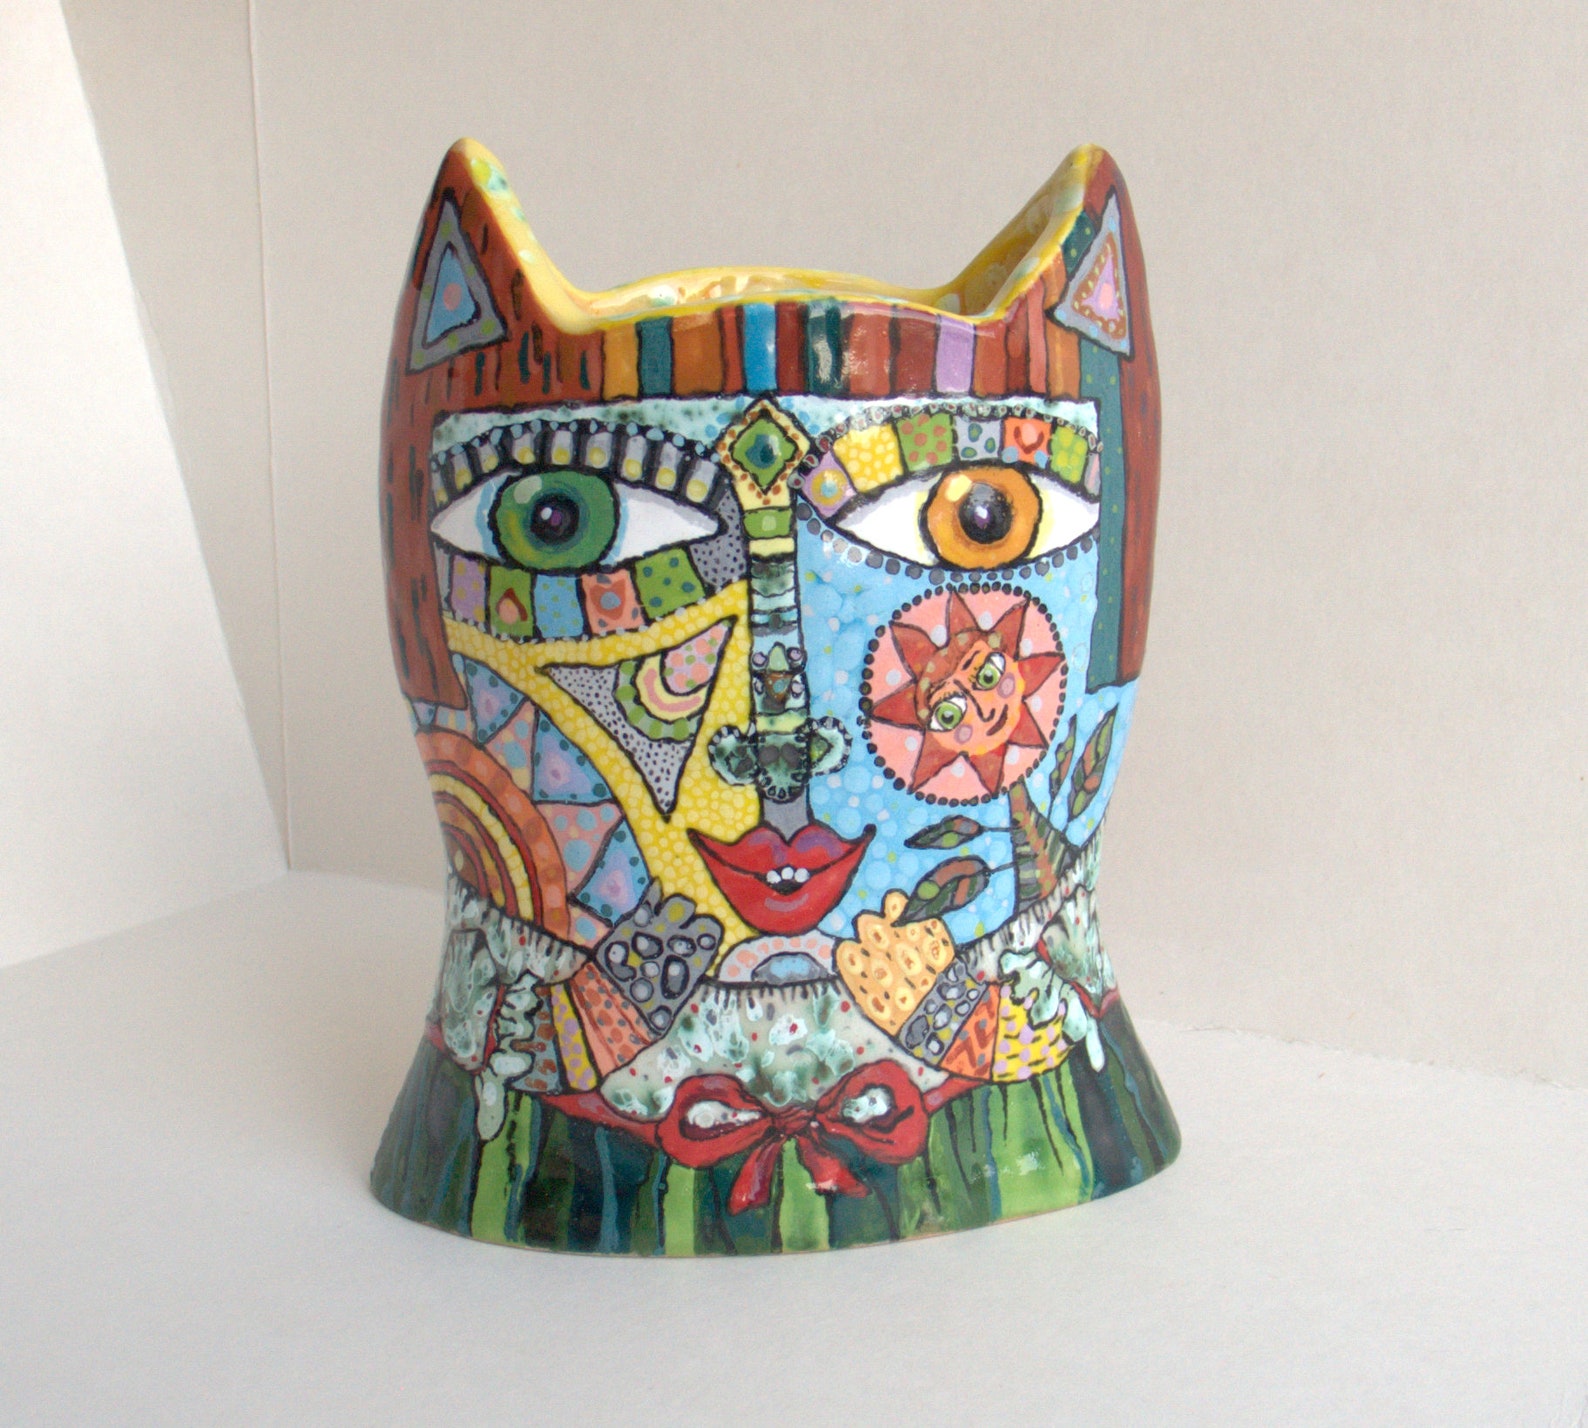  Cat  vase  Ceramic  cat  Ceramic  vase  Ceramic  vase  in the form 